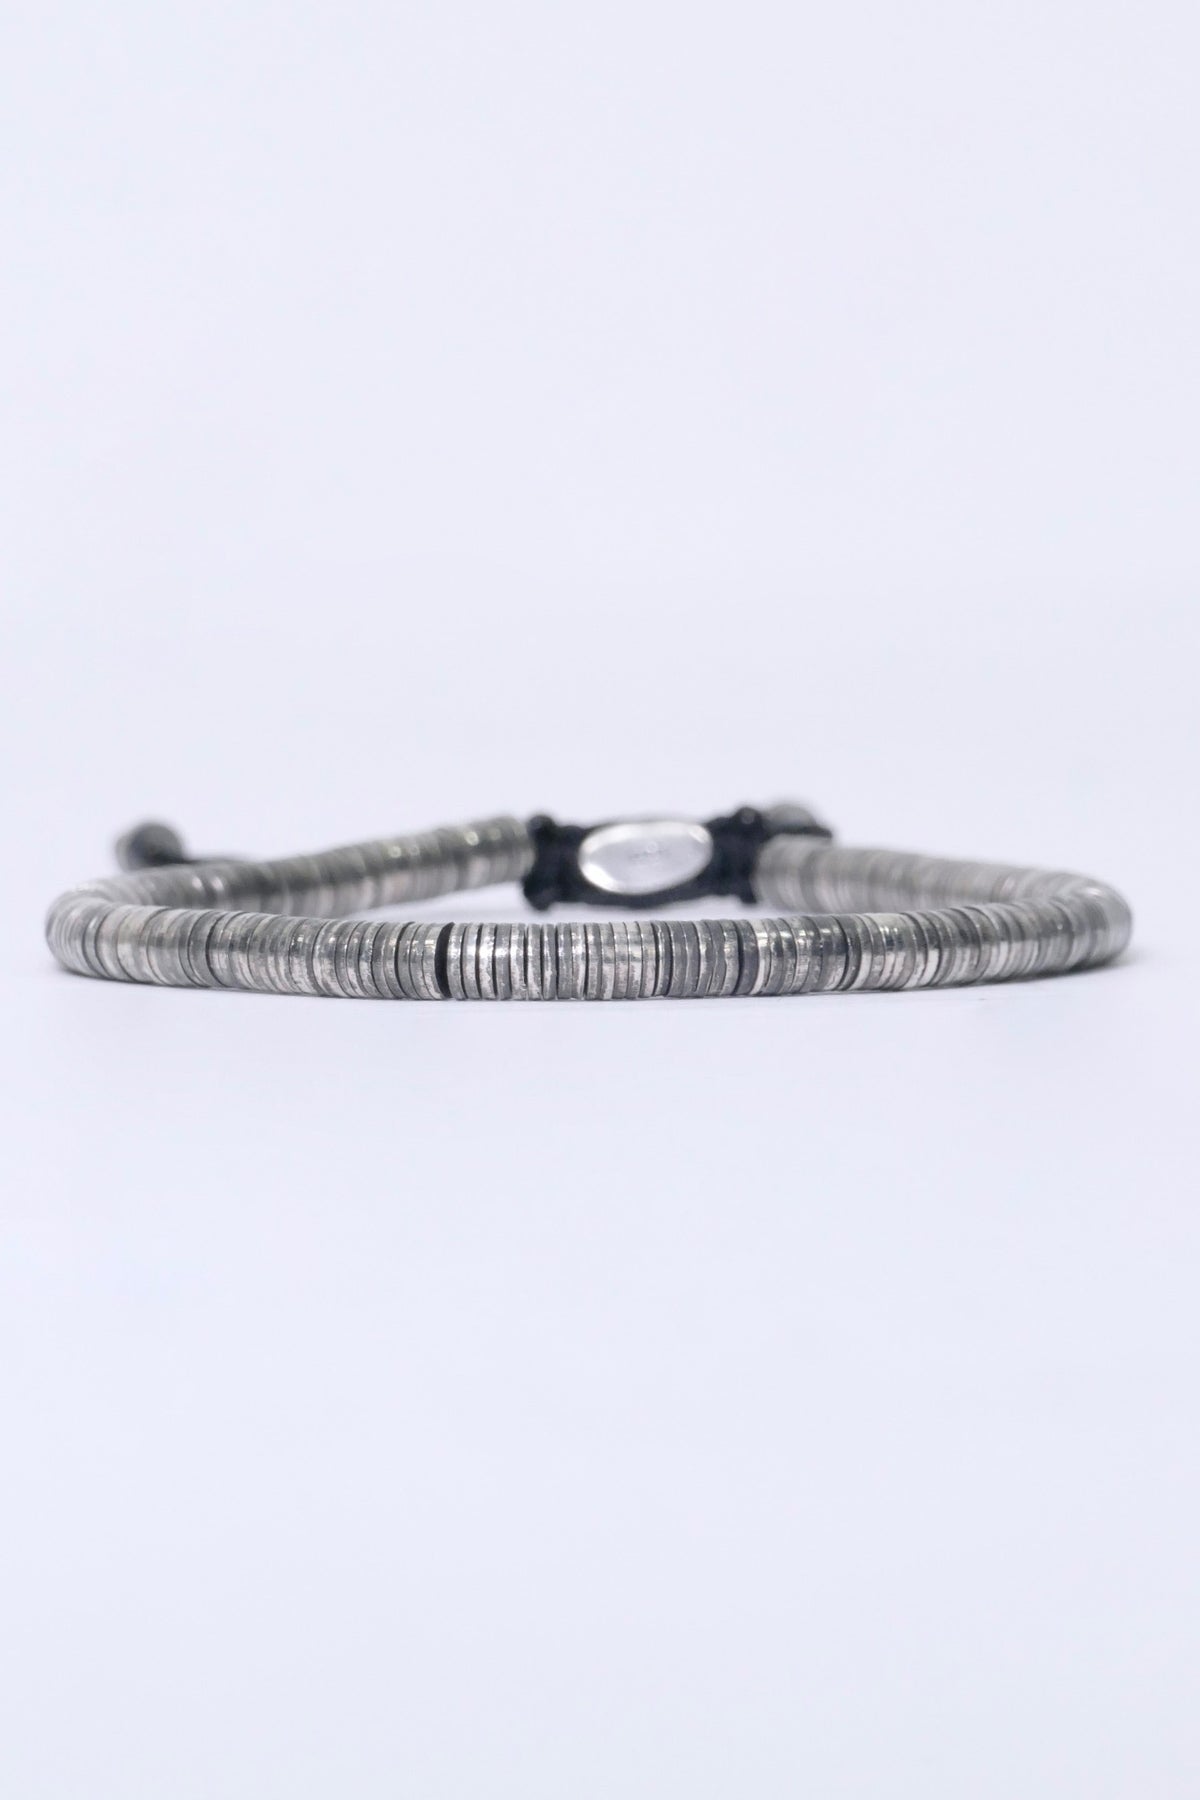 M.Cohen by MAOR Stacked Carved Oxidized Disc Bracelet - Silver